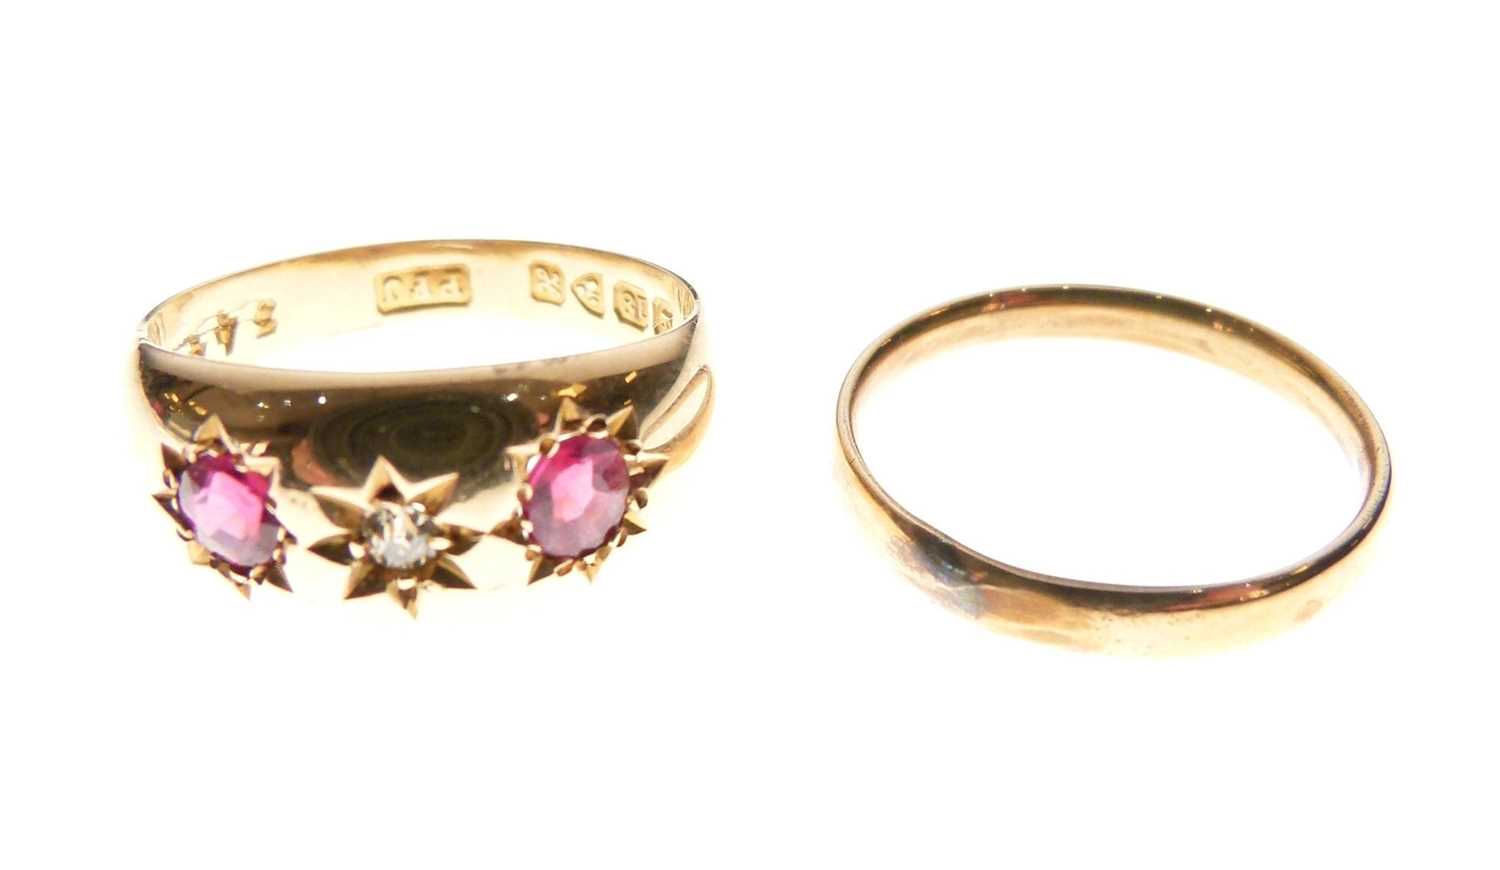 Lot 17 - 18ct gold gypsy-set diamond and red coloured stones, and an unmarked yellow metal wedding band